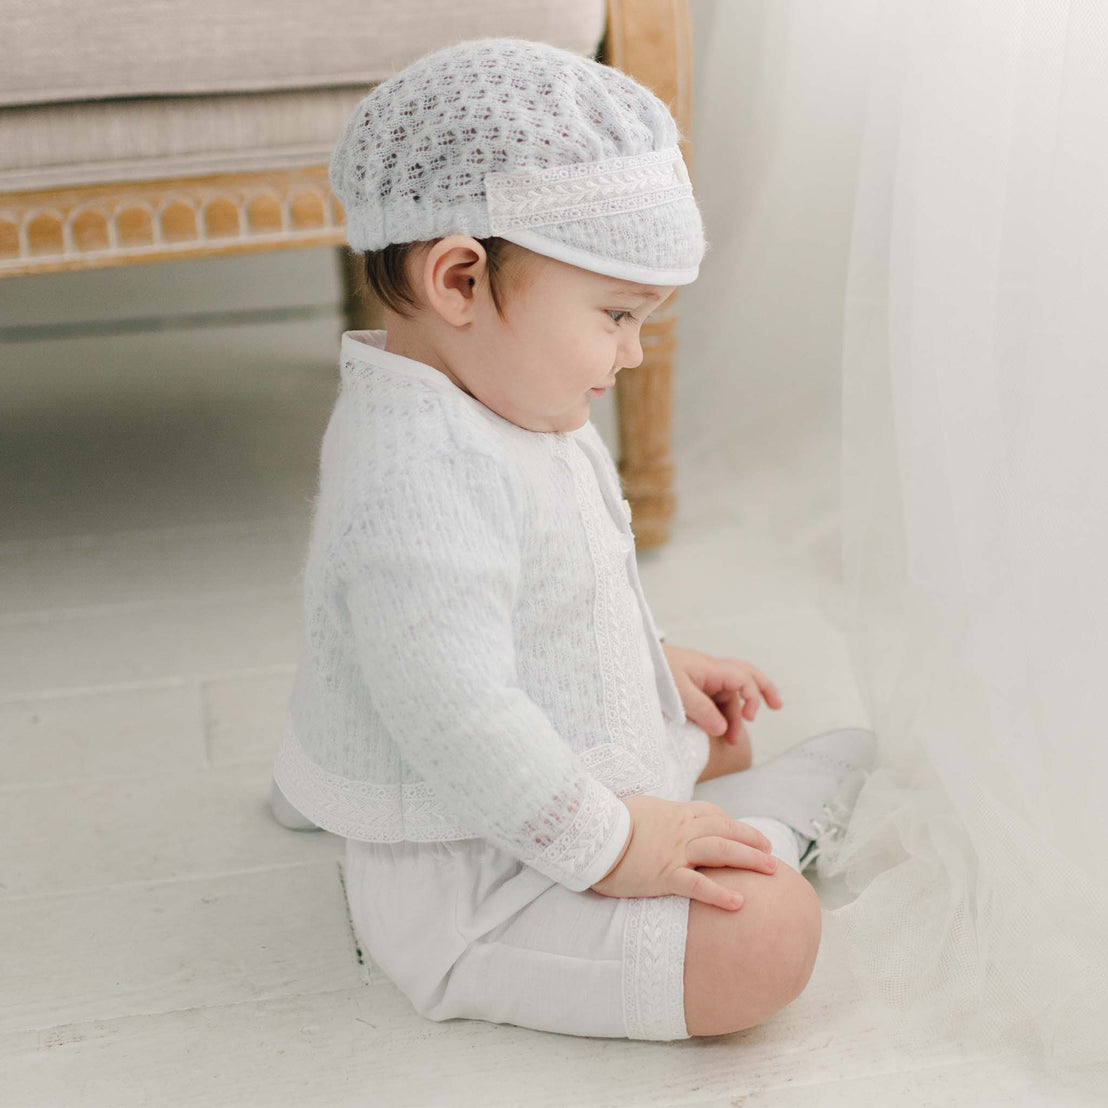 A toddler sitting on the floor, wearing the light blue knit Oliver Sweater Shorts Suit and cap, gently touching a sheer curtain with a soft, focused expression.